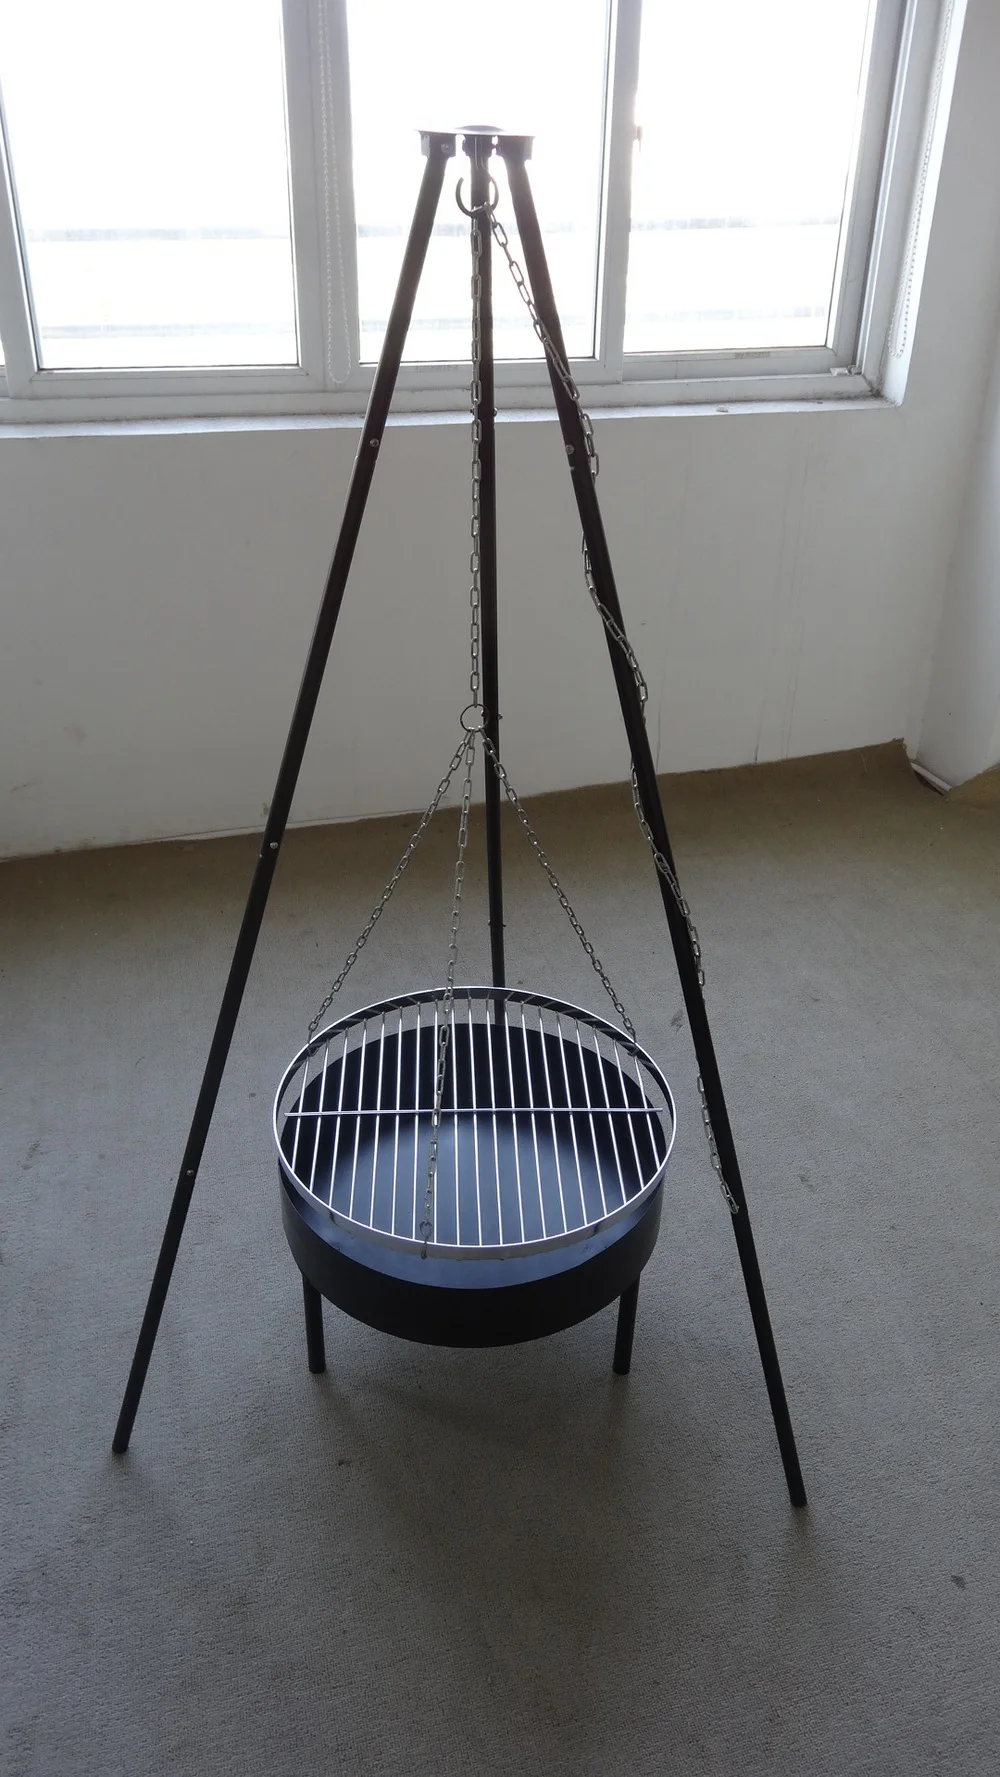 Hanging Barbecue Grill Outdoor Fire Pit,New Design Brazier Fire Pit,Tripod Metal Fire Pits - Buy 